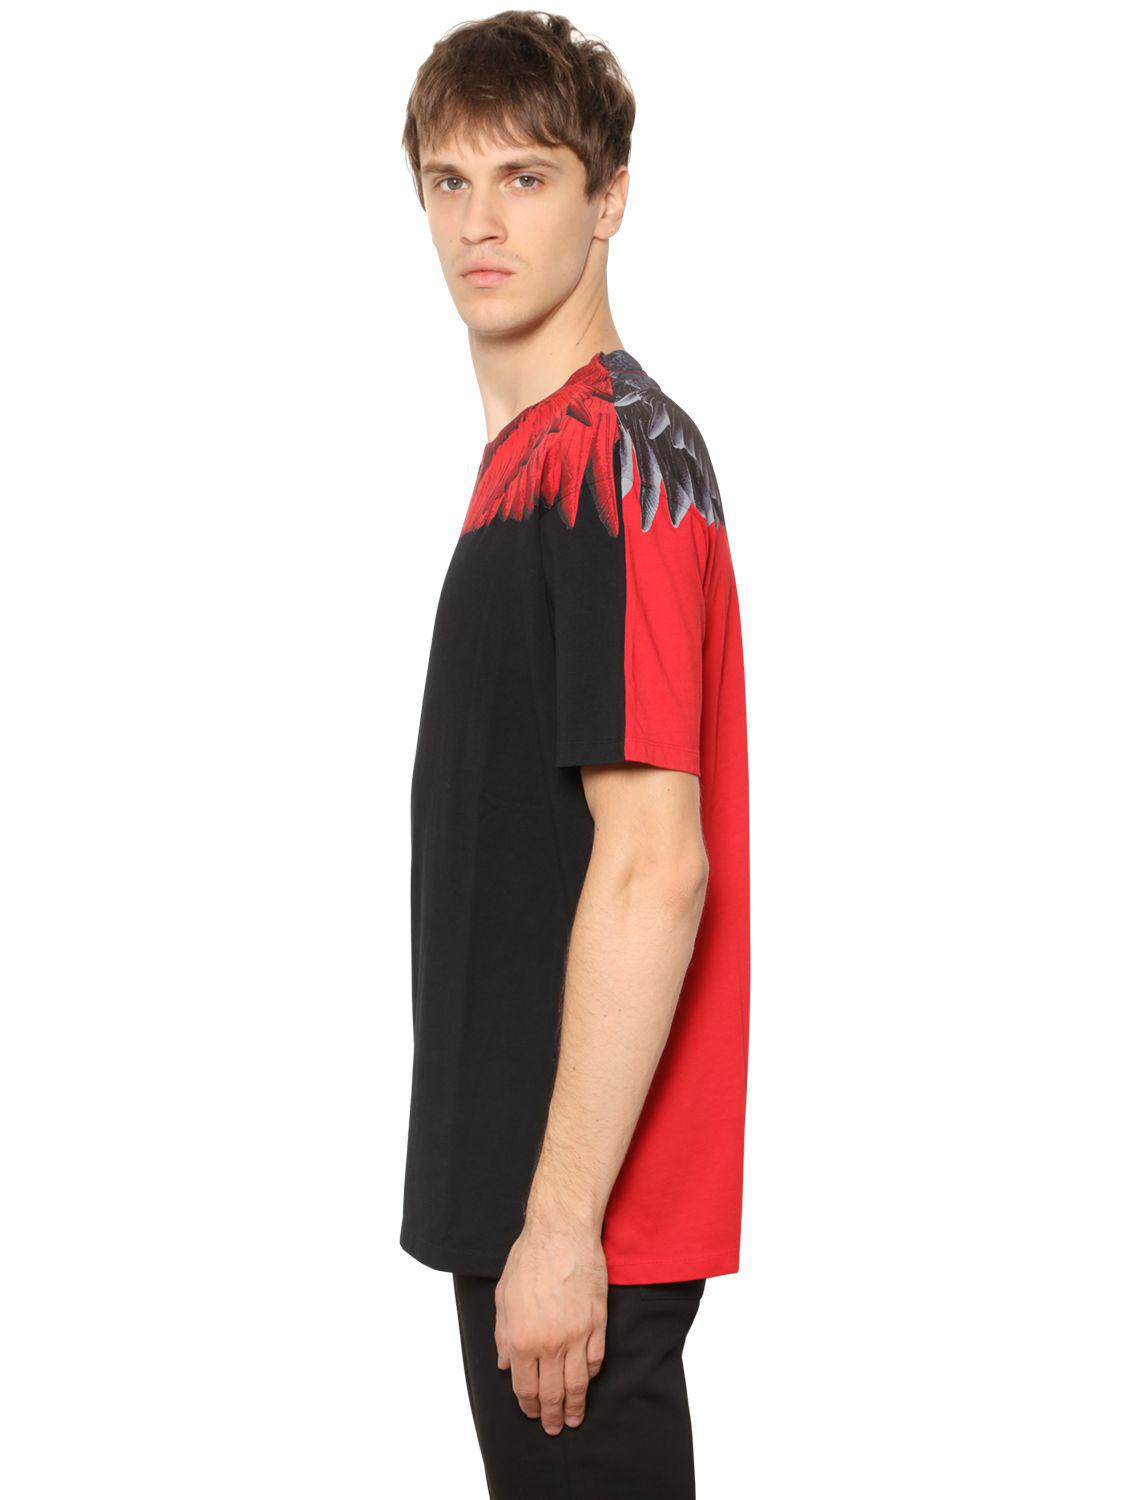 Marcelo Burlon Two Tone Double Wing Jersey T-shirt in Black/Red (Red) for  Men - Lyst